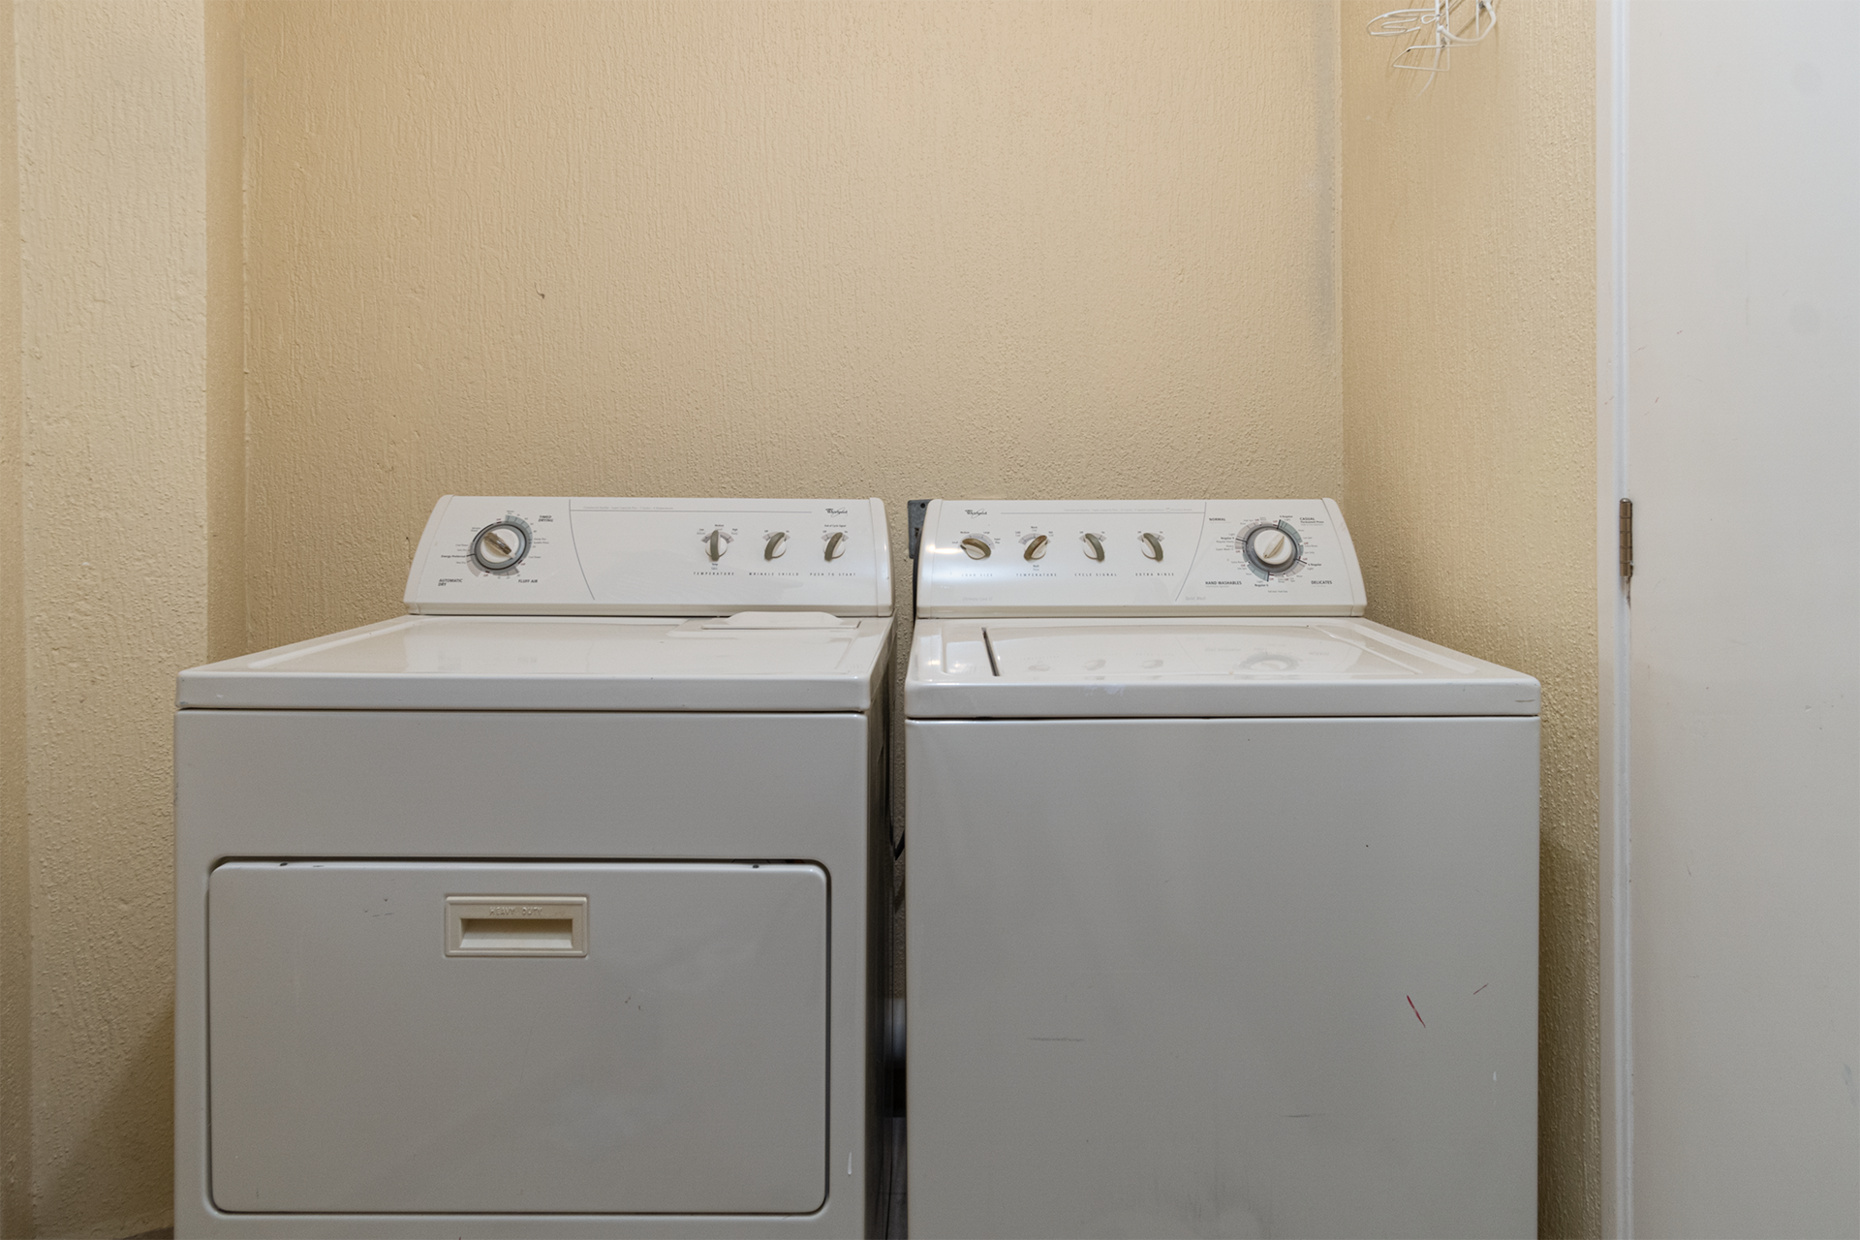 There is a washer and dryer in the utility room